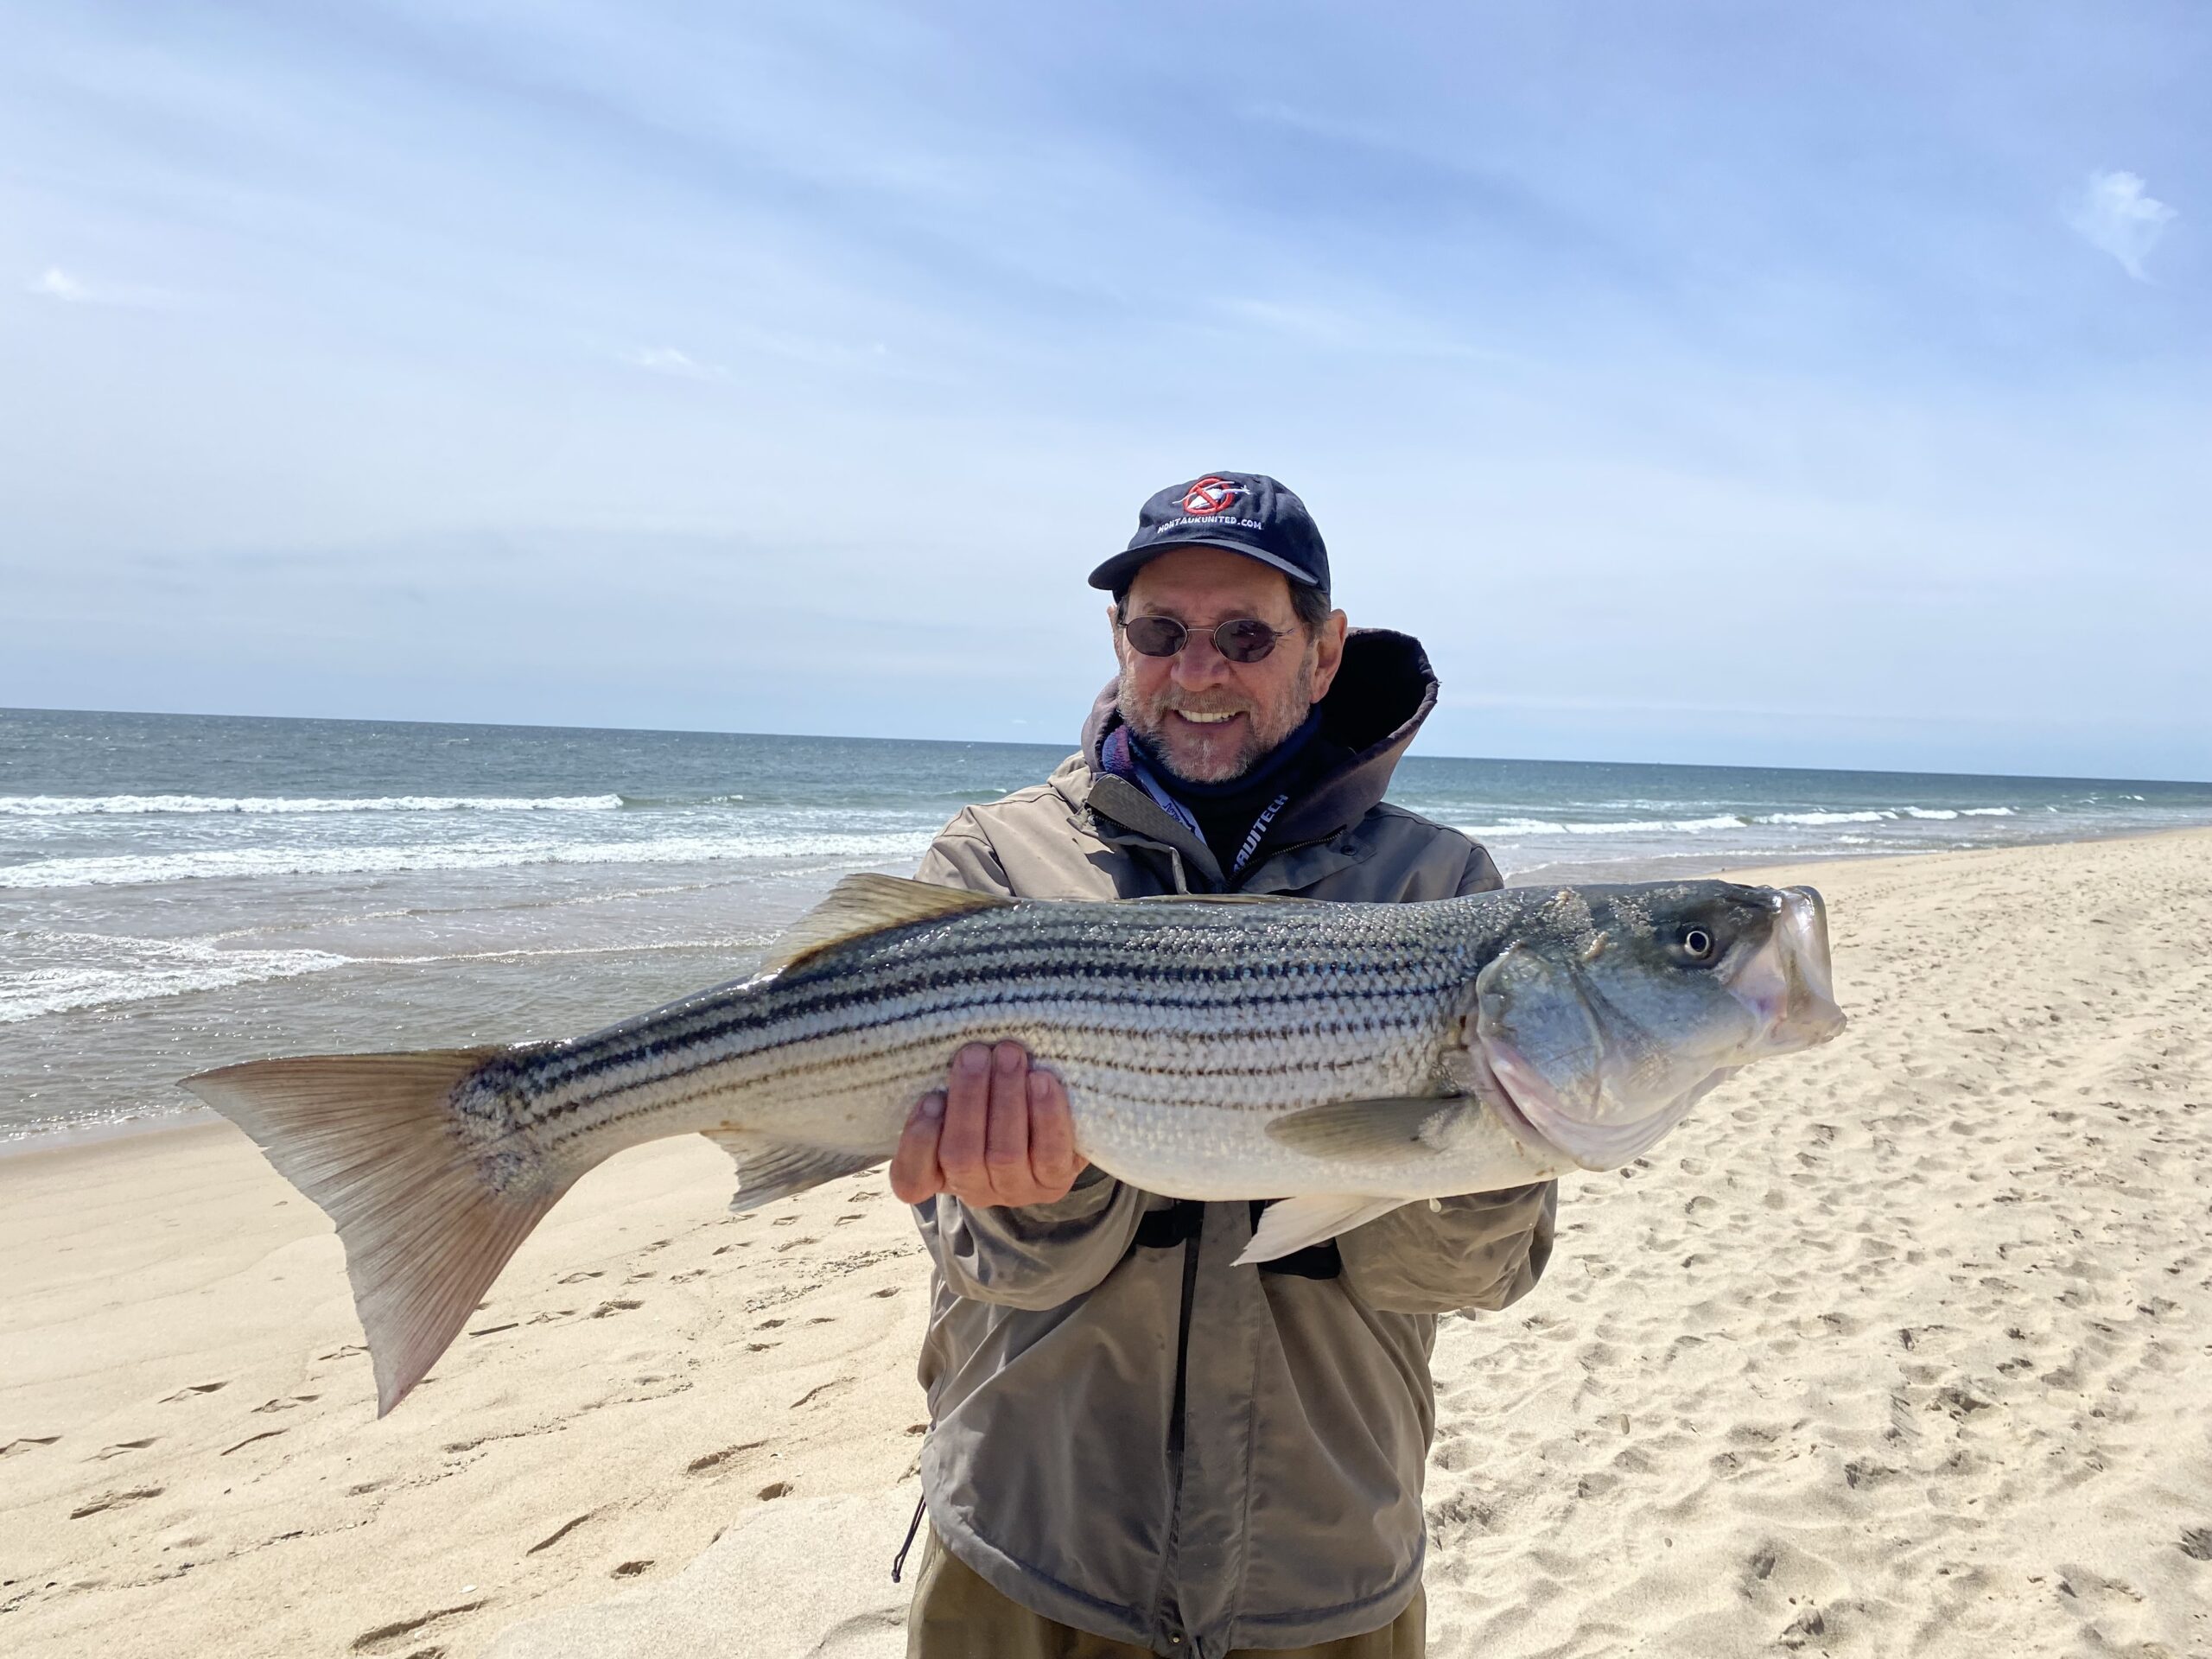 The stripers are here: Greg Flanagan with an early season 